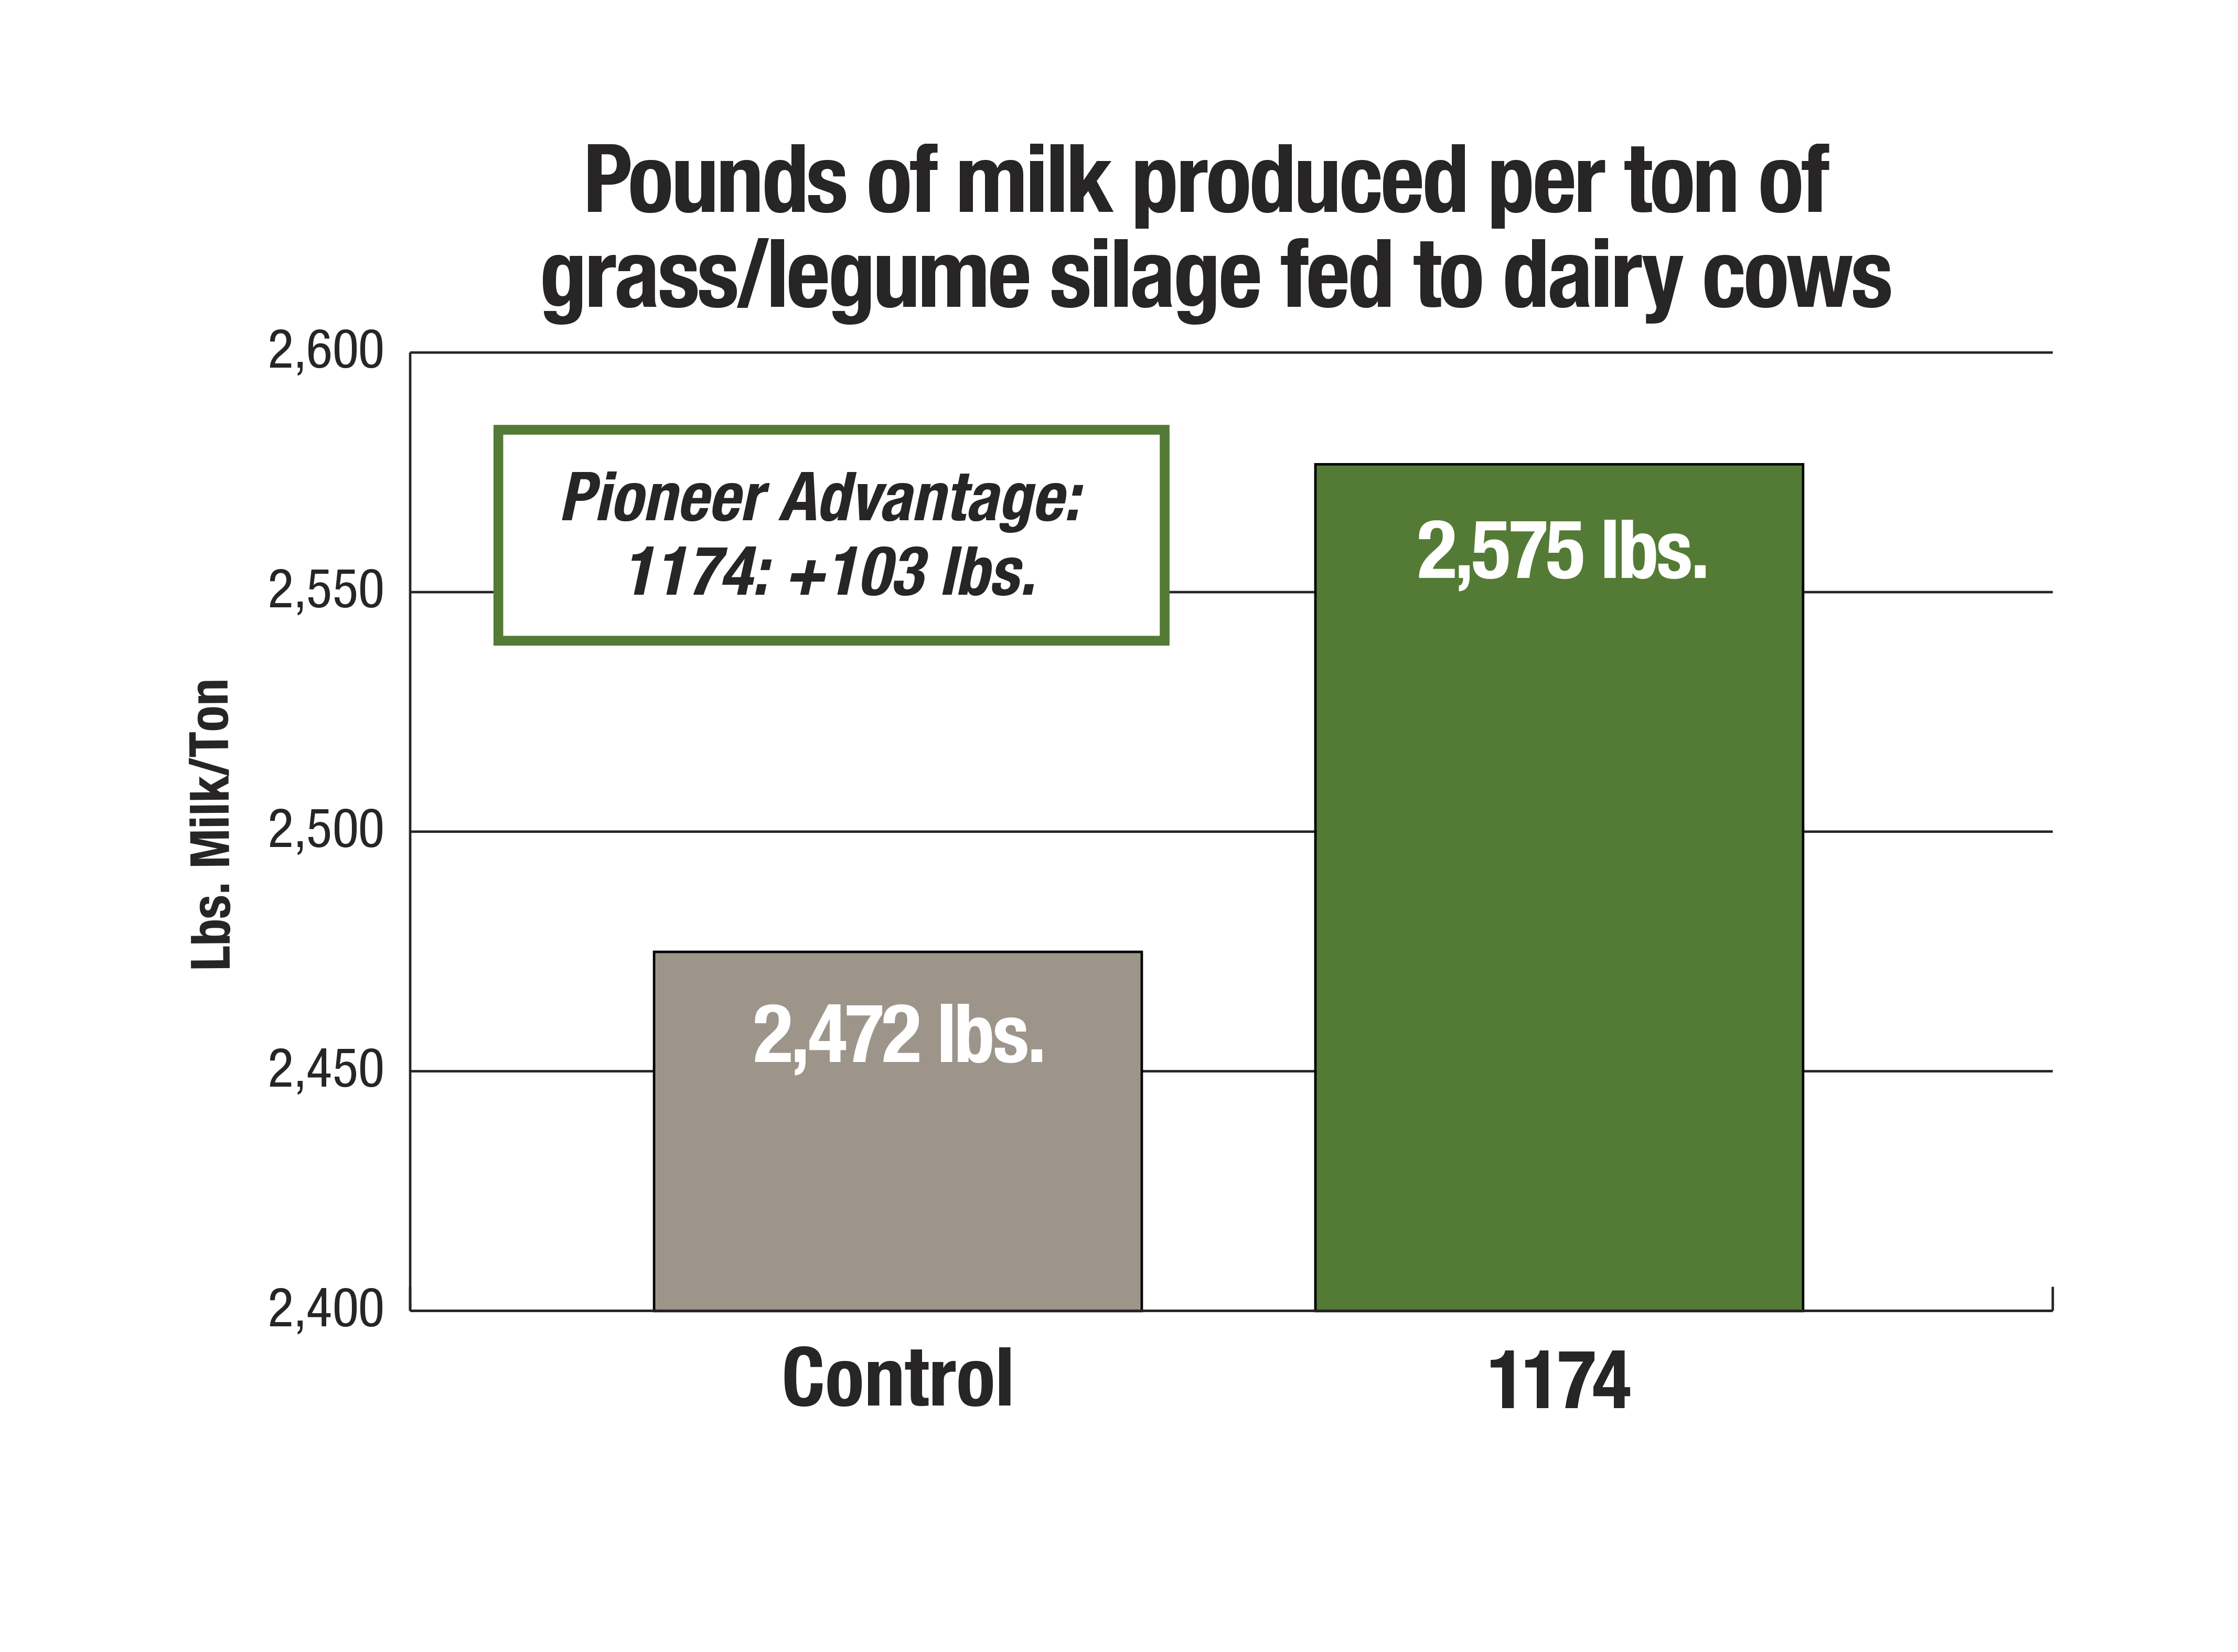 Pounds of milk produced per ton of grass-legume silage fed to dairy cows